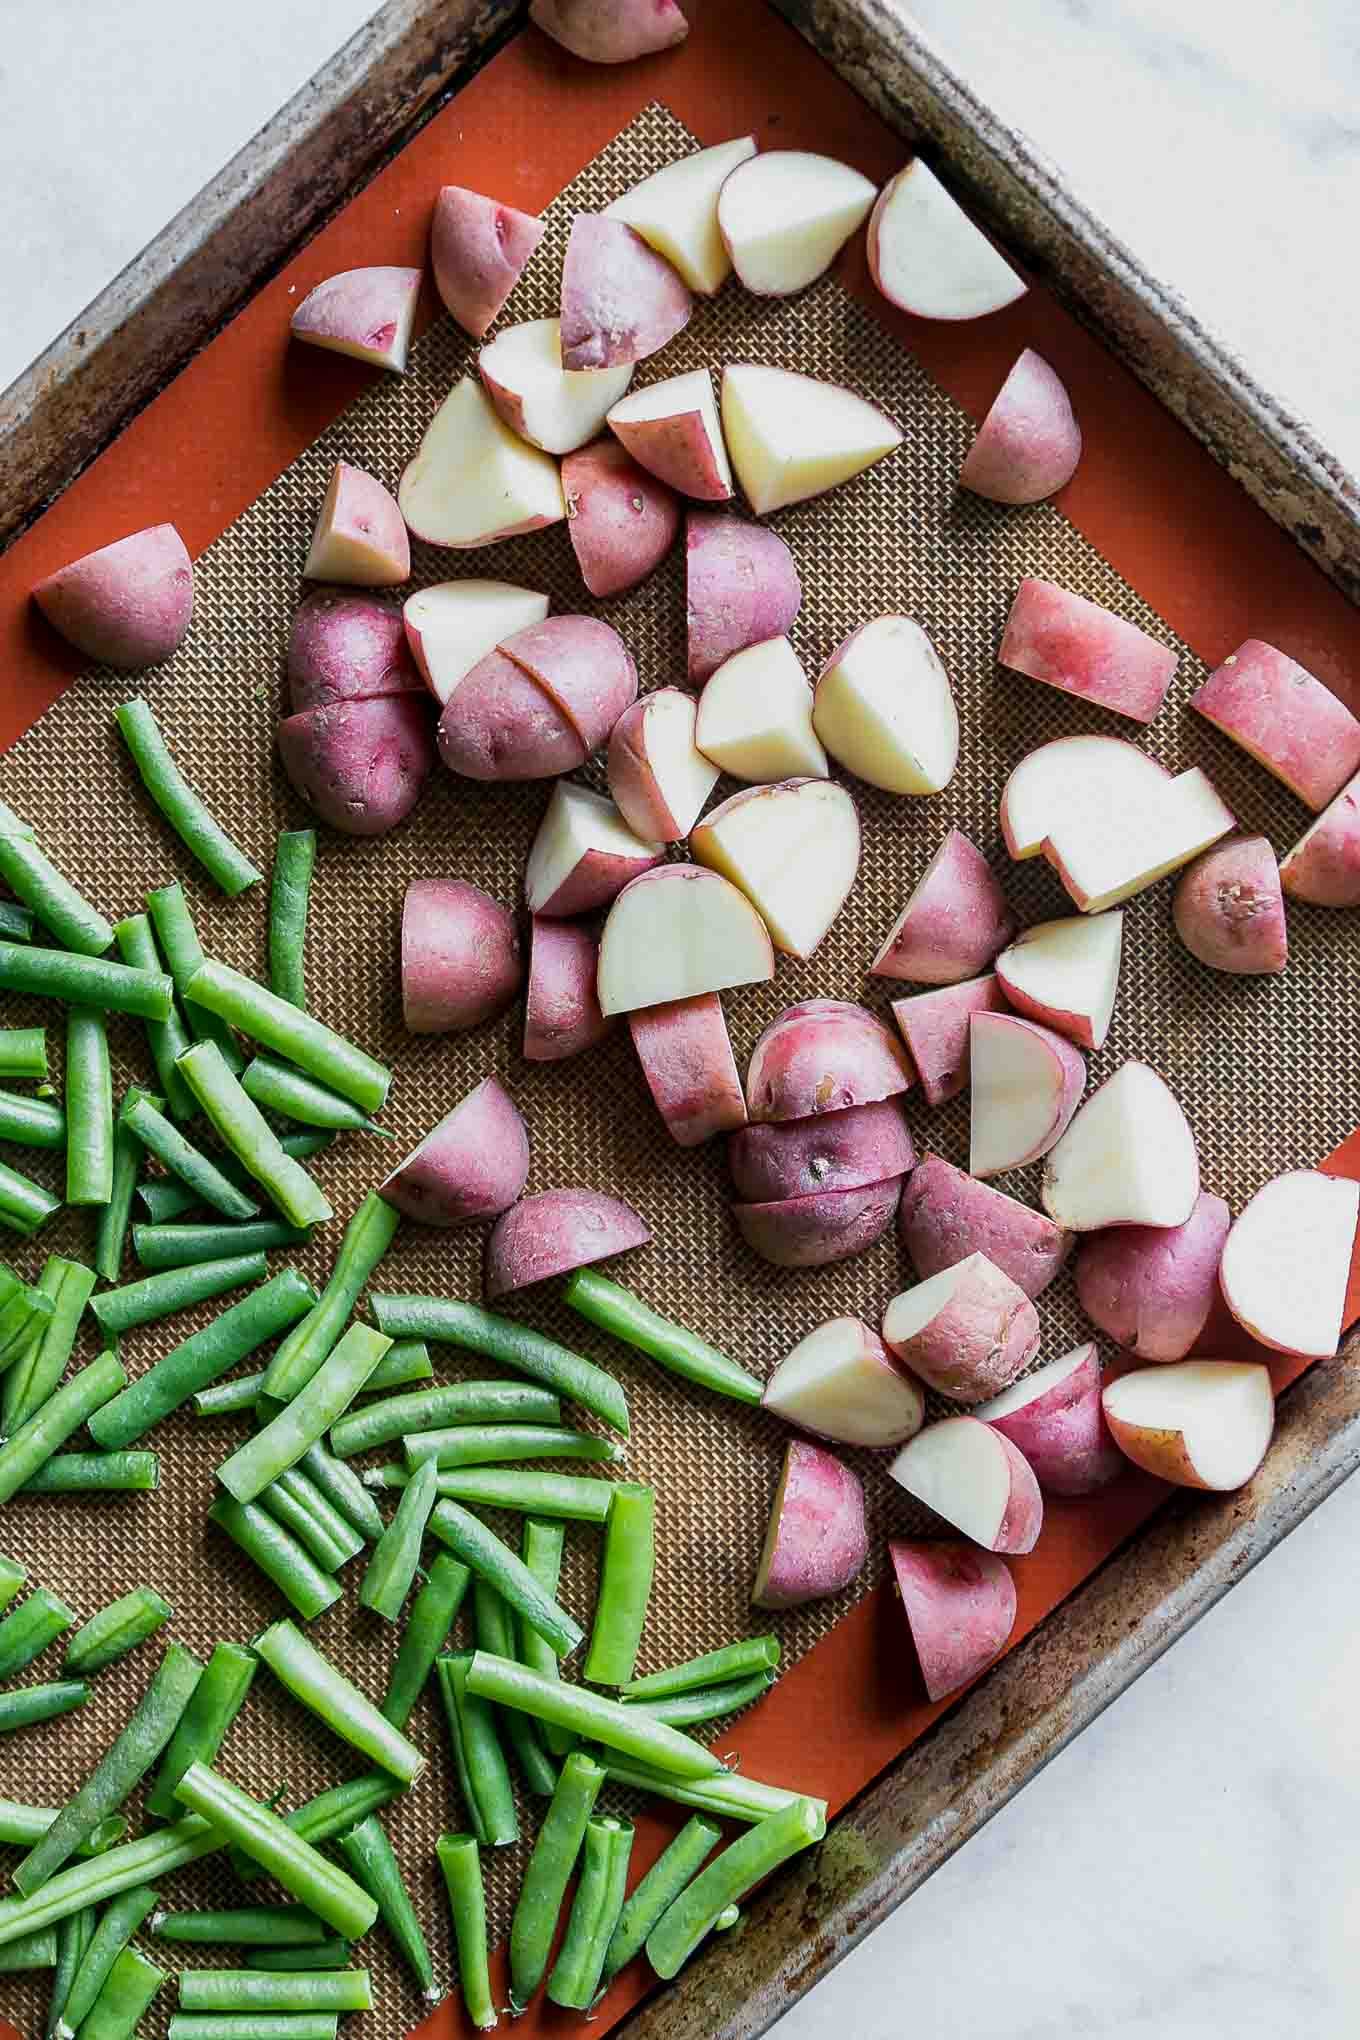 cut potatoes and green beans on a baking sheet before roasting